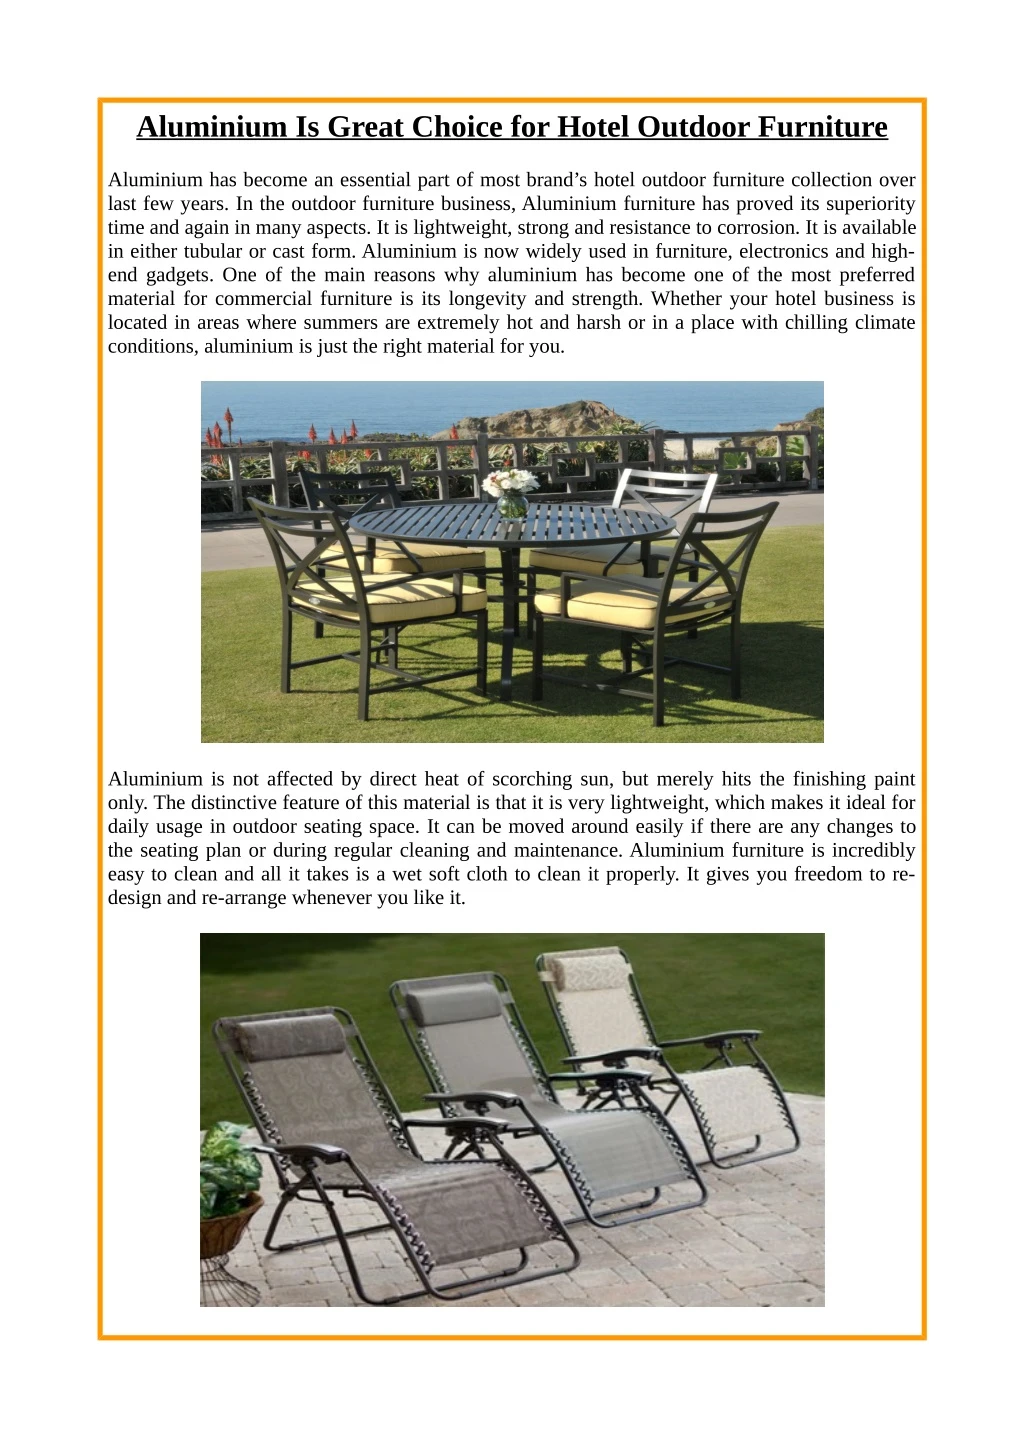 aluminium is great choice for hotel outdoor